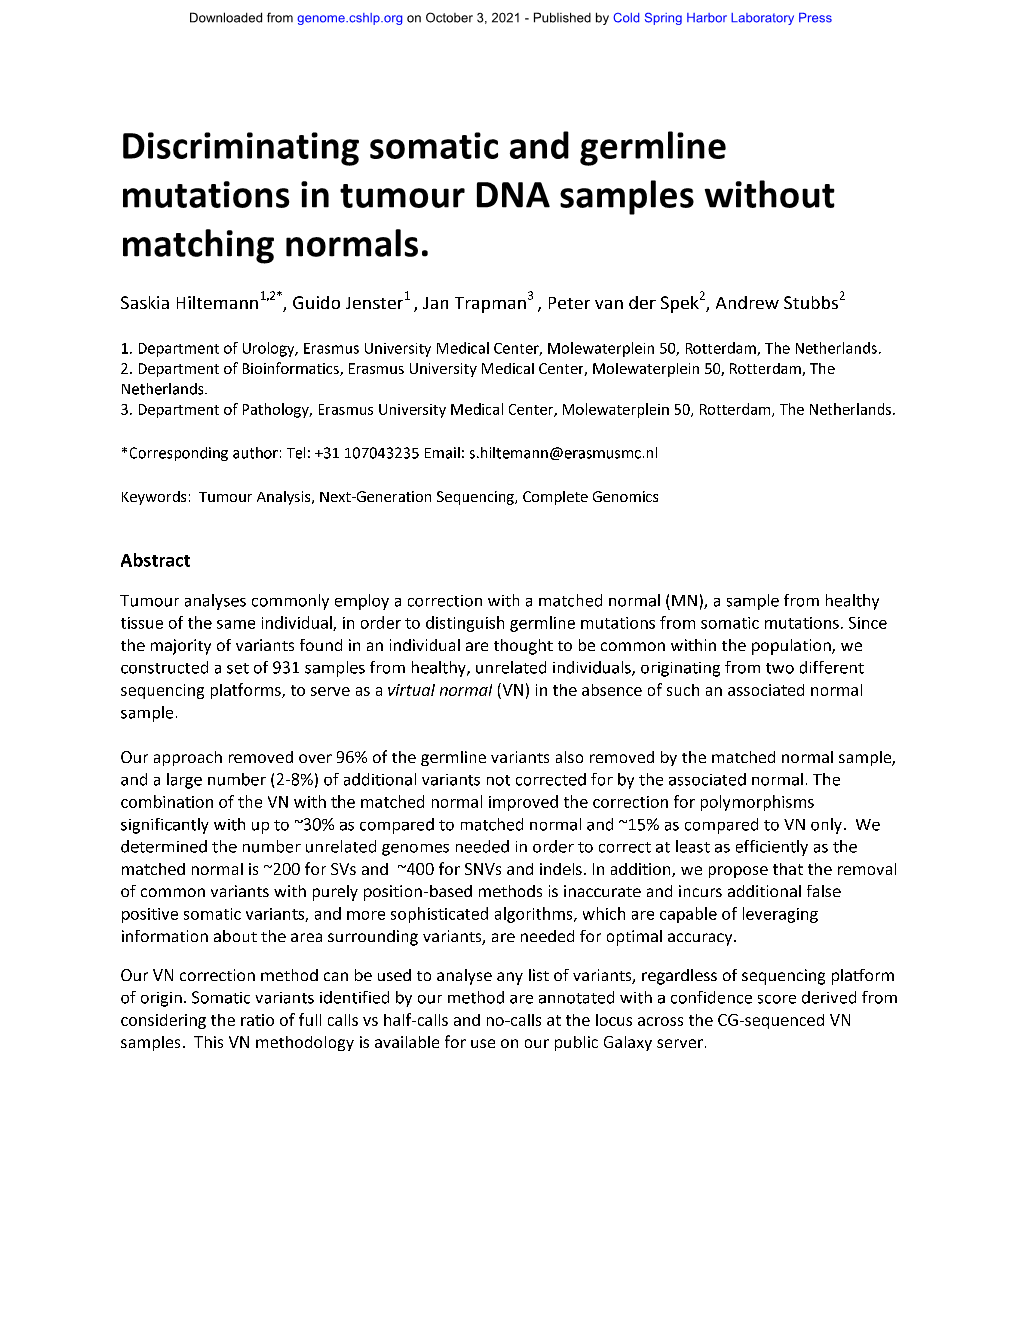 Discriminating Somatic and Germline Mutations in Tumour DNA Samples Without Matching Normals